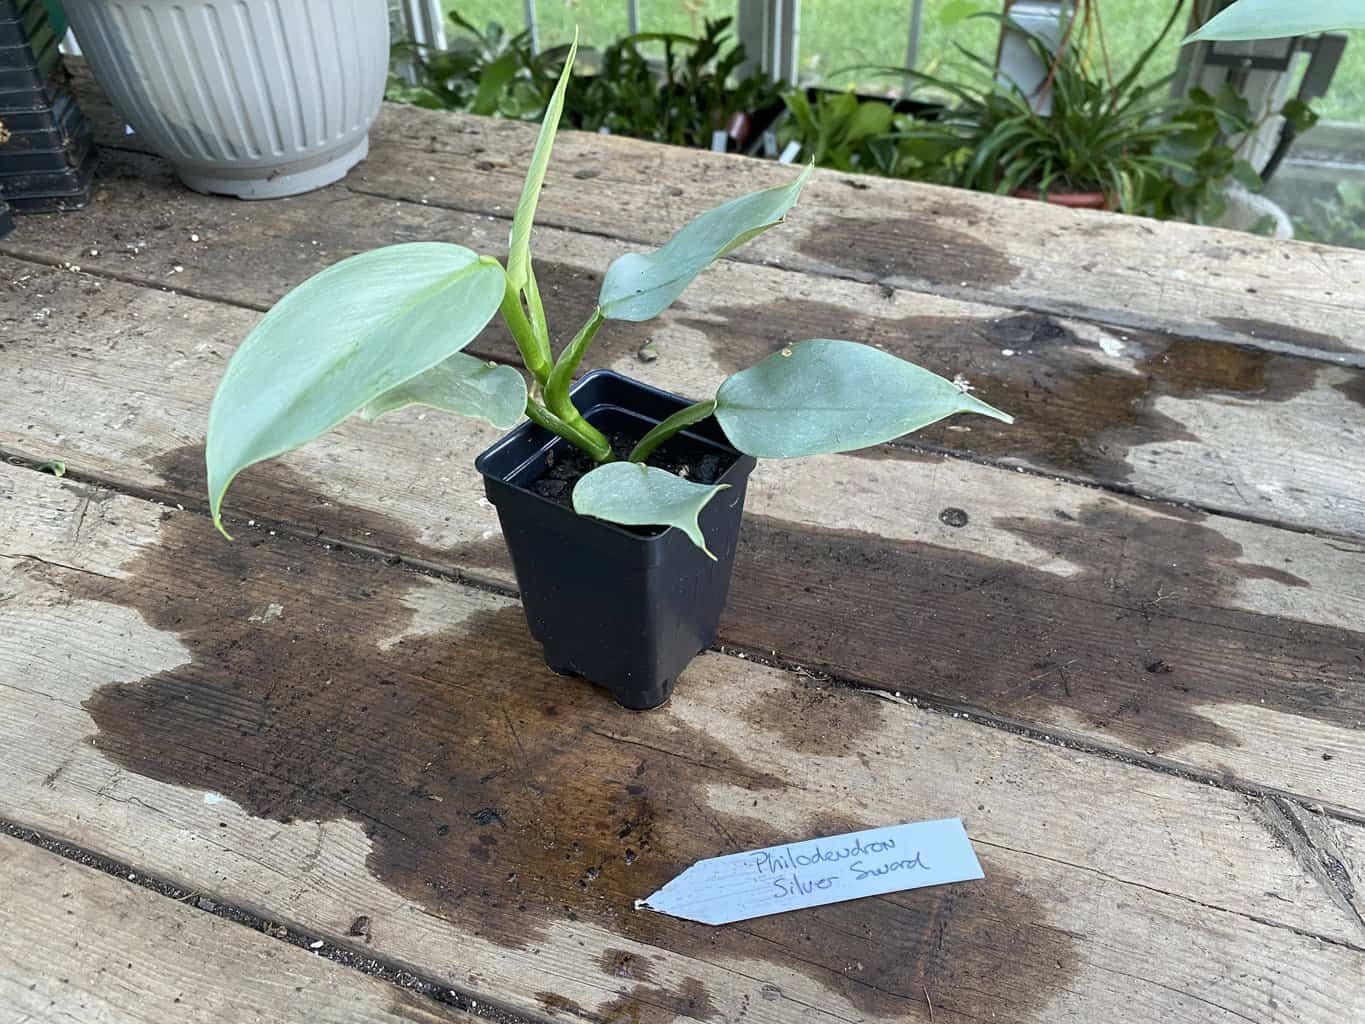 Philodendron Silver Sword Hastatum 2.5 Inch Tall Live Starter Pla, Plantly